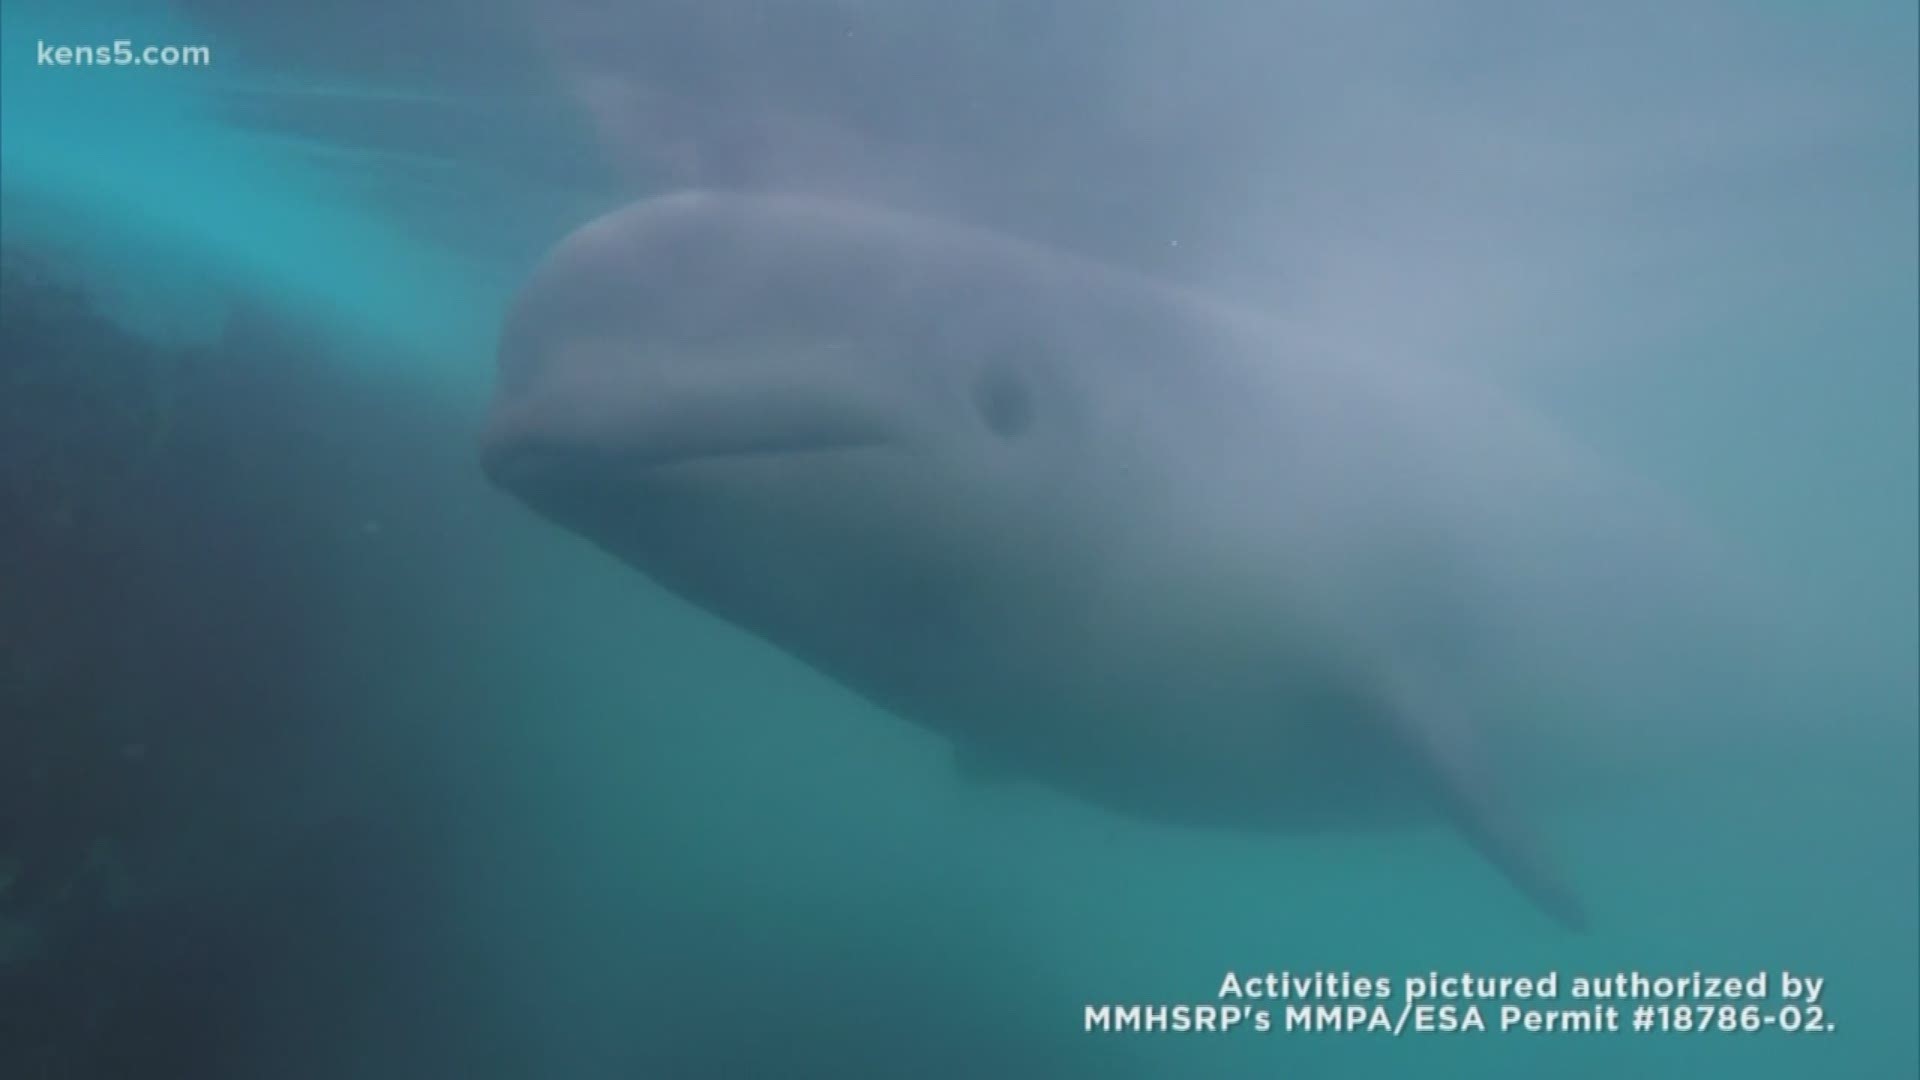 Tyonek, the endangered beluga calf found abandoned in Western Cook Inlet, Alaska, has been under treatment for persistent digestive challenges since he was rescued more than a year ago. He is now being treated around the clock at SeaWorld San Antonio.